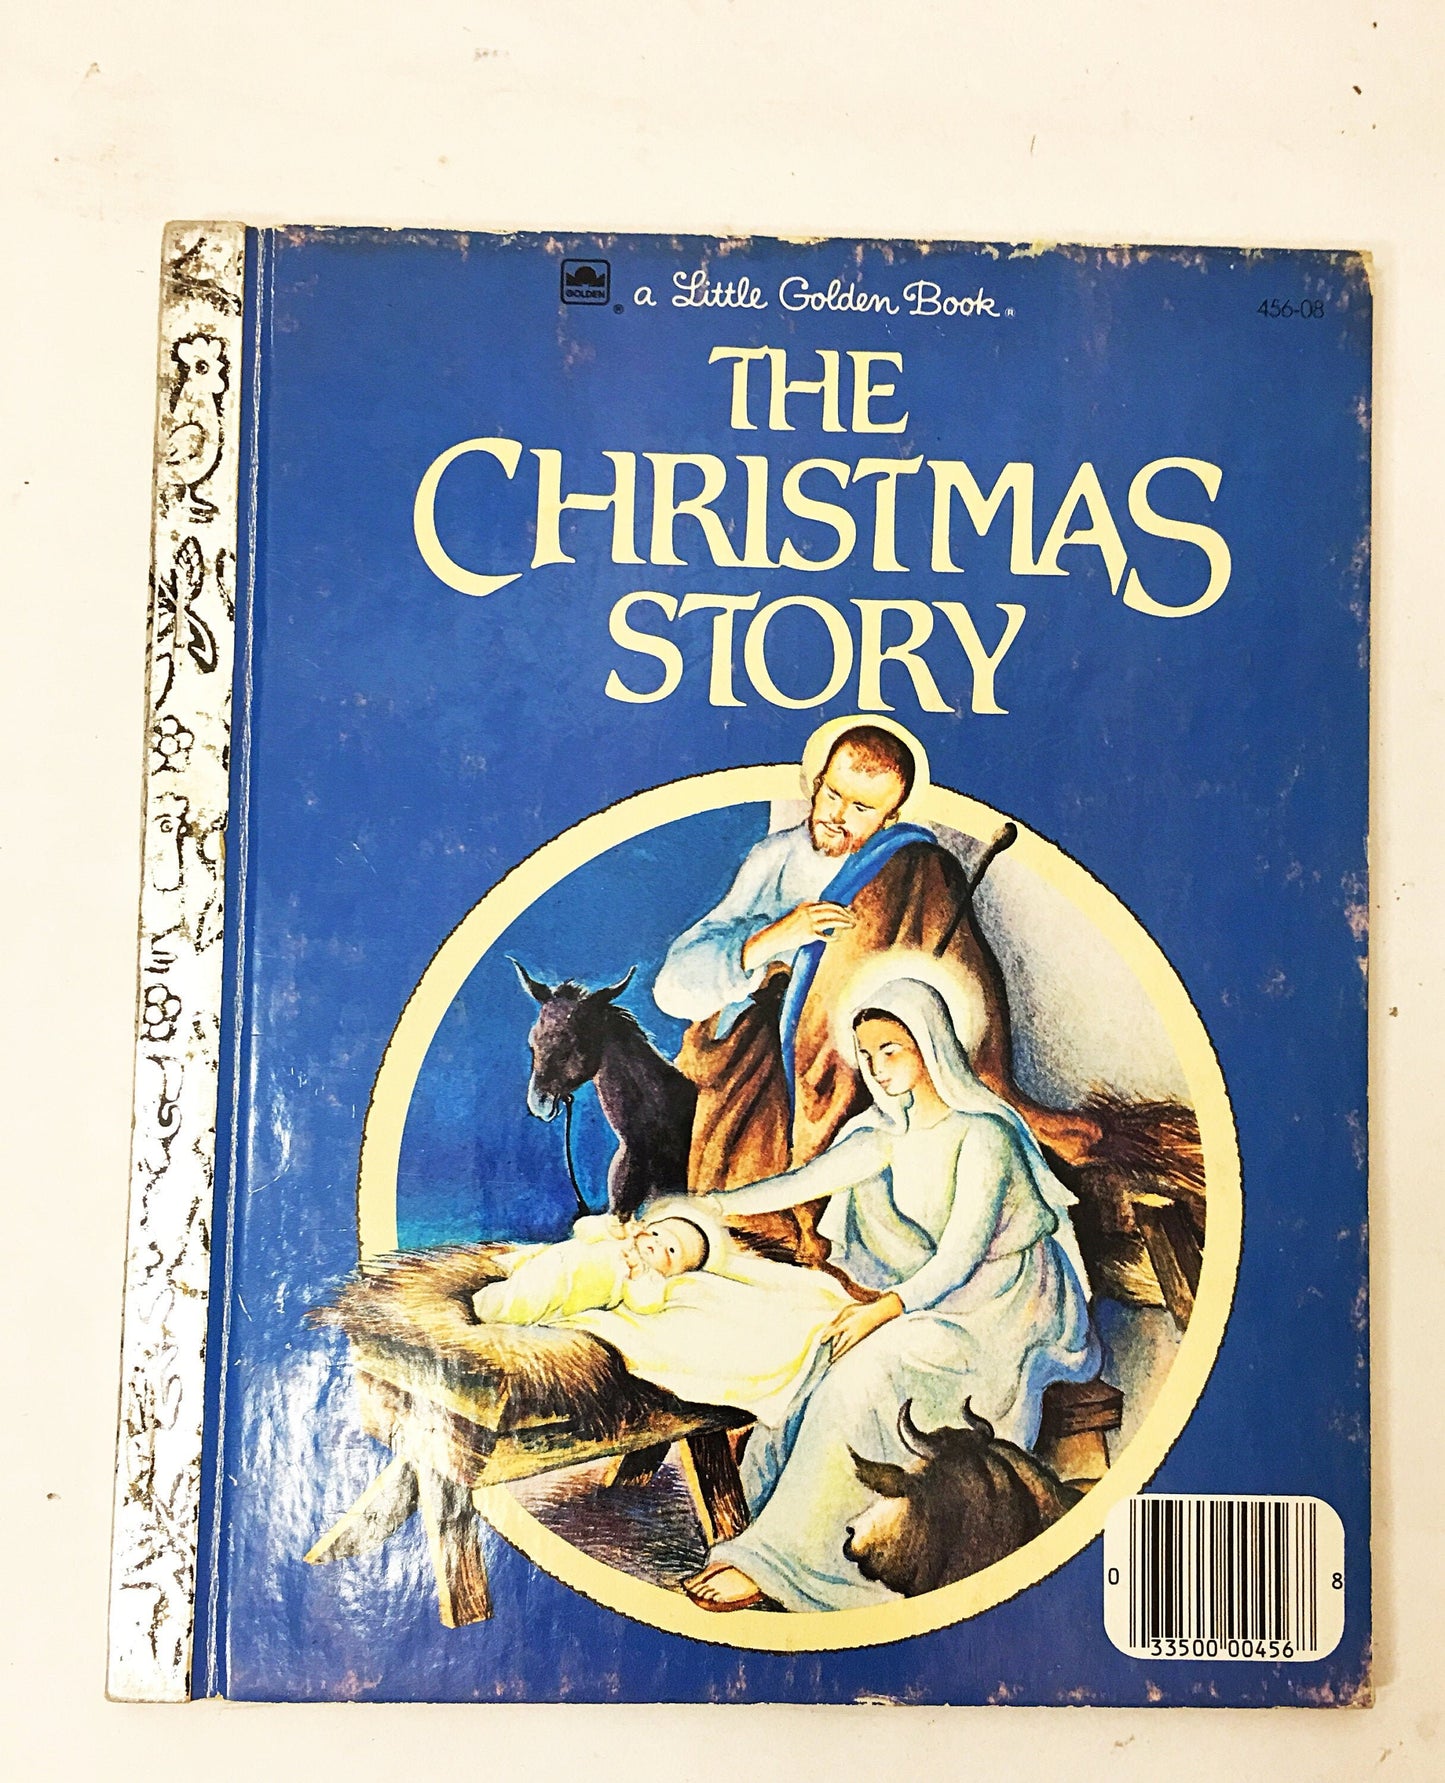 Christmas Story timeless classic vintage book by Jane Werner beautifully illustrated by Eloise Wilkin Little Golden Book circa 1980.